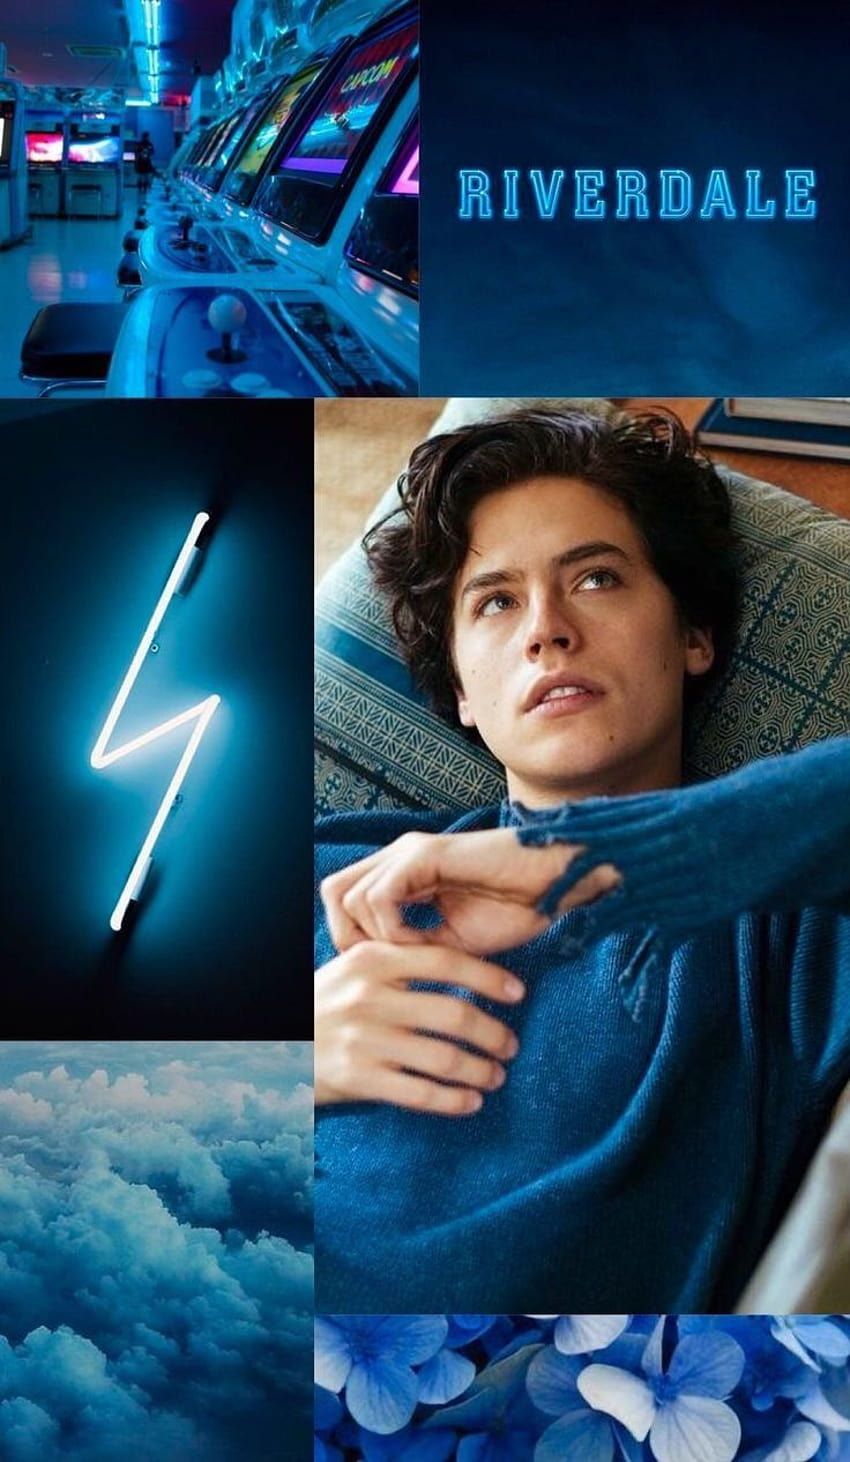 A collage of images from Riverdale, including a lightning bolt, a blue aesthetic, and a close up of Cole Sprouse as Jughead. - Riverdale